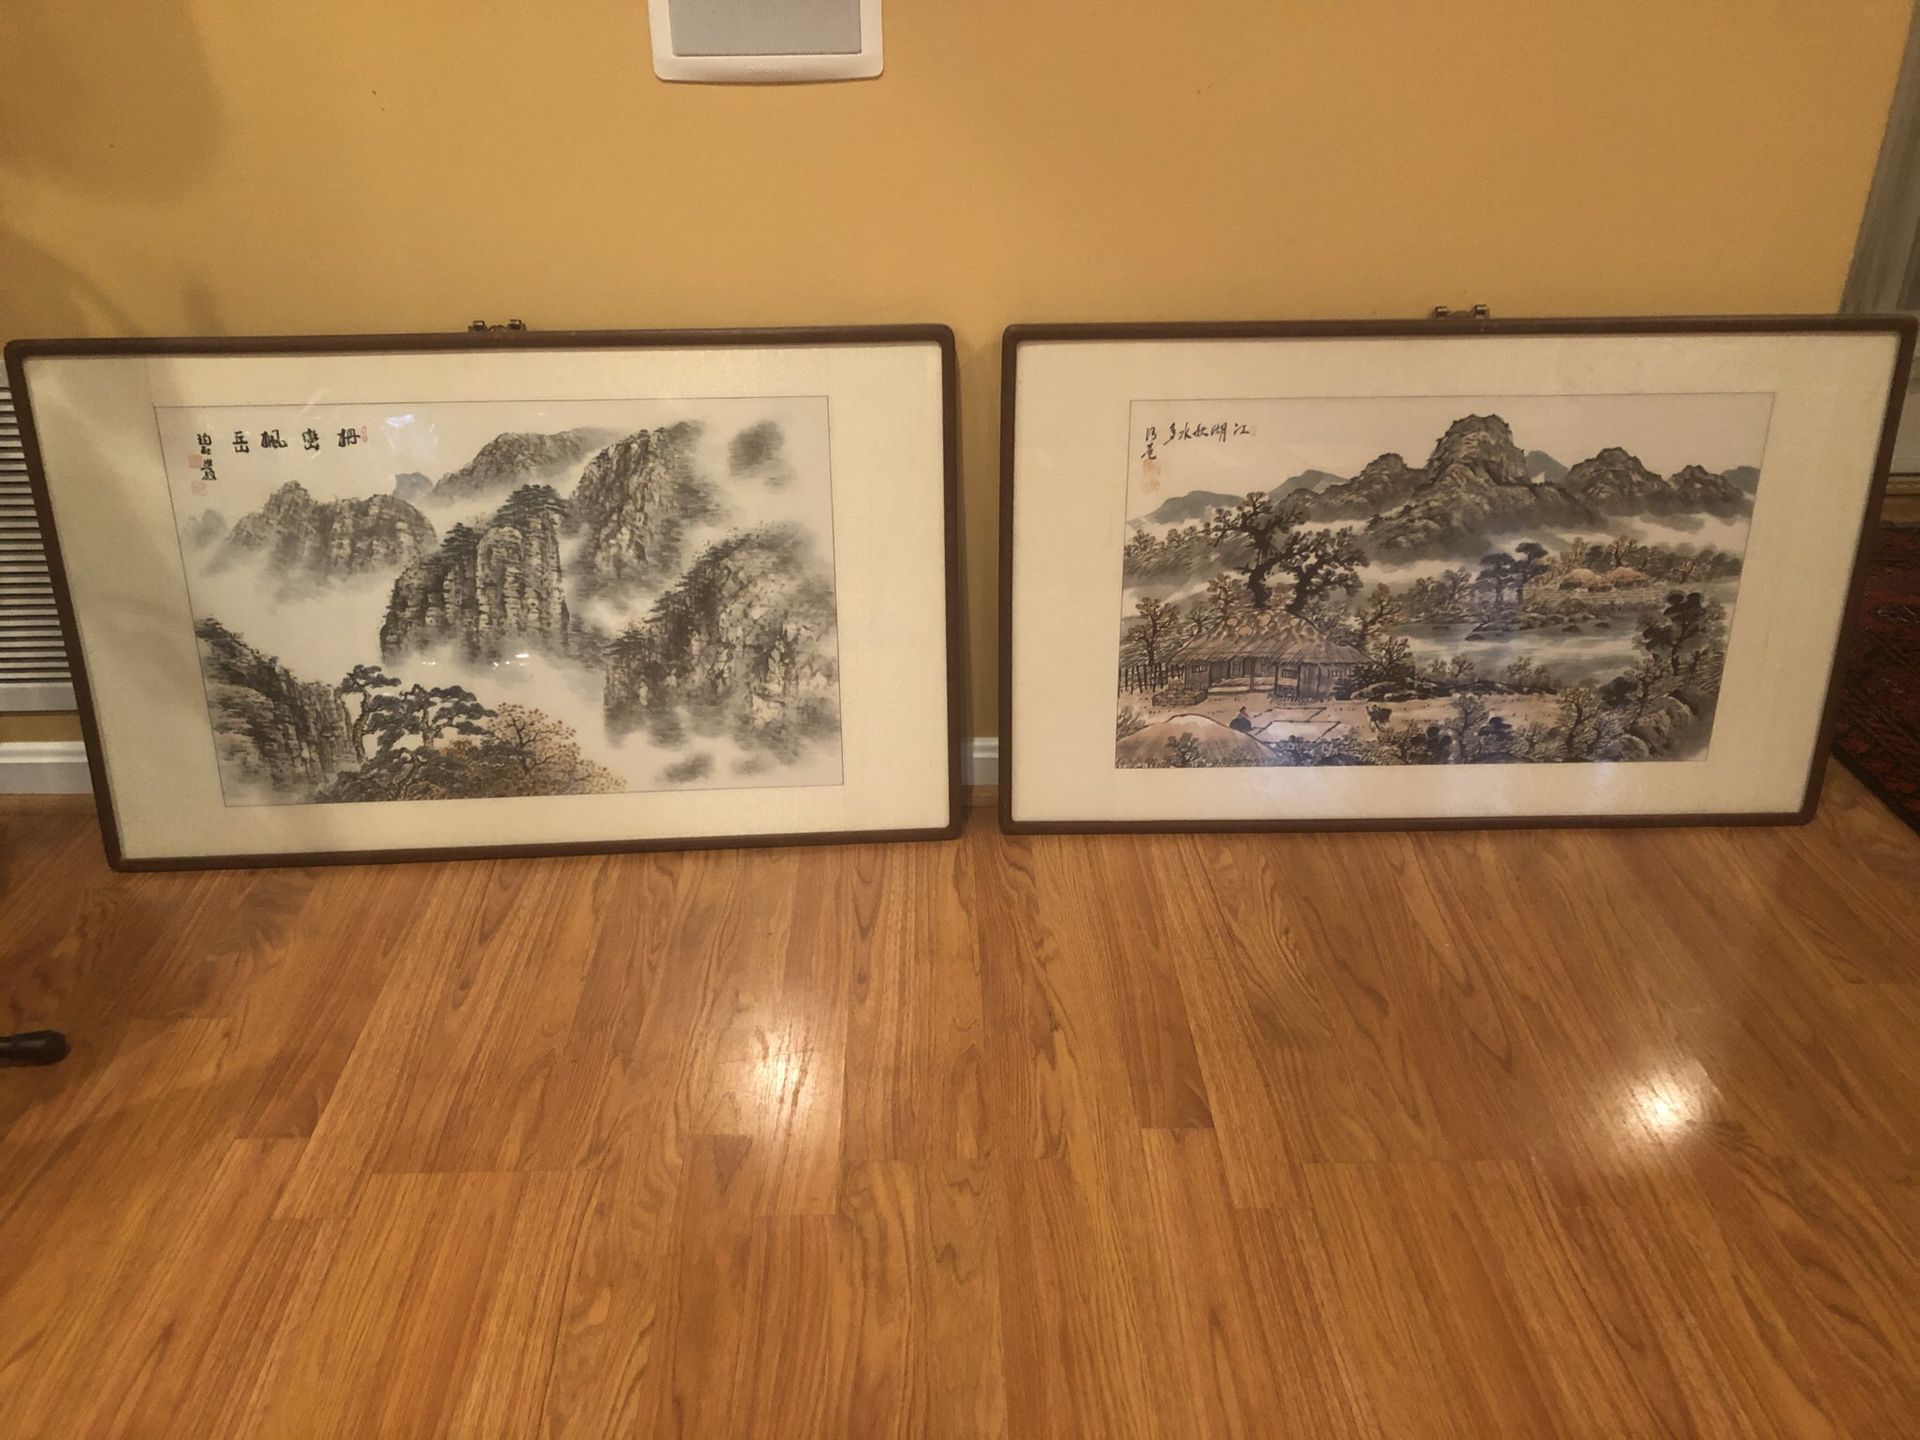 Korean painting on silk borders, 36 ins wide x 22 ins high. Wooden frame. Selling as a pair. To pick up in Chantilly, CASH only. Wear mask. Please